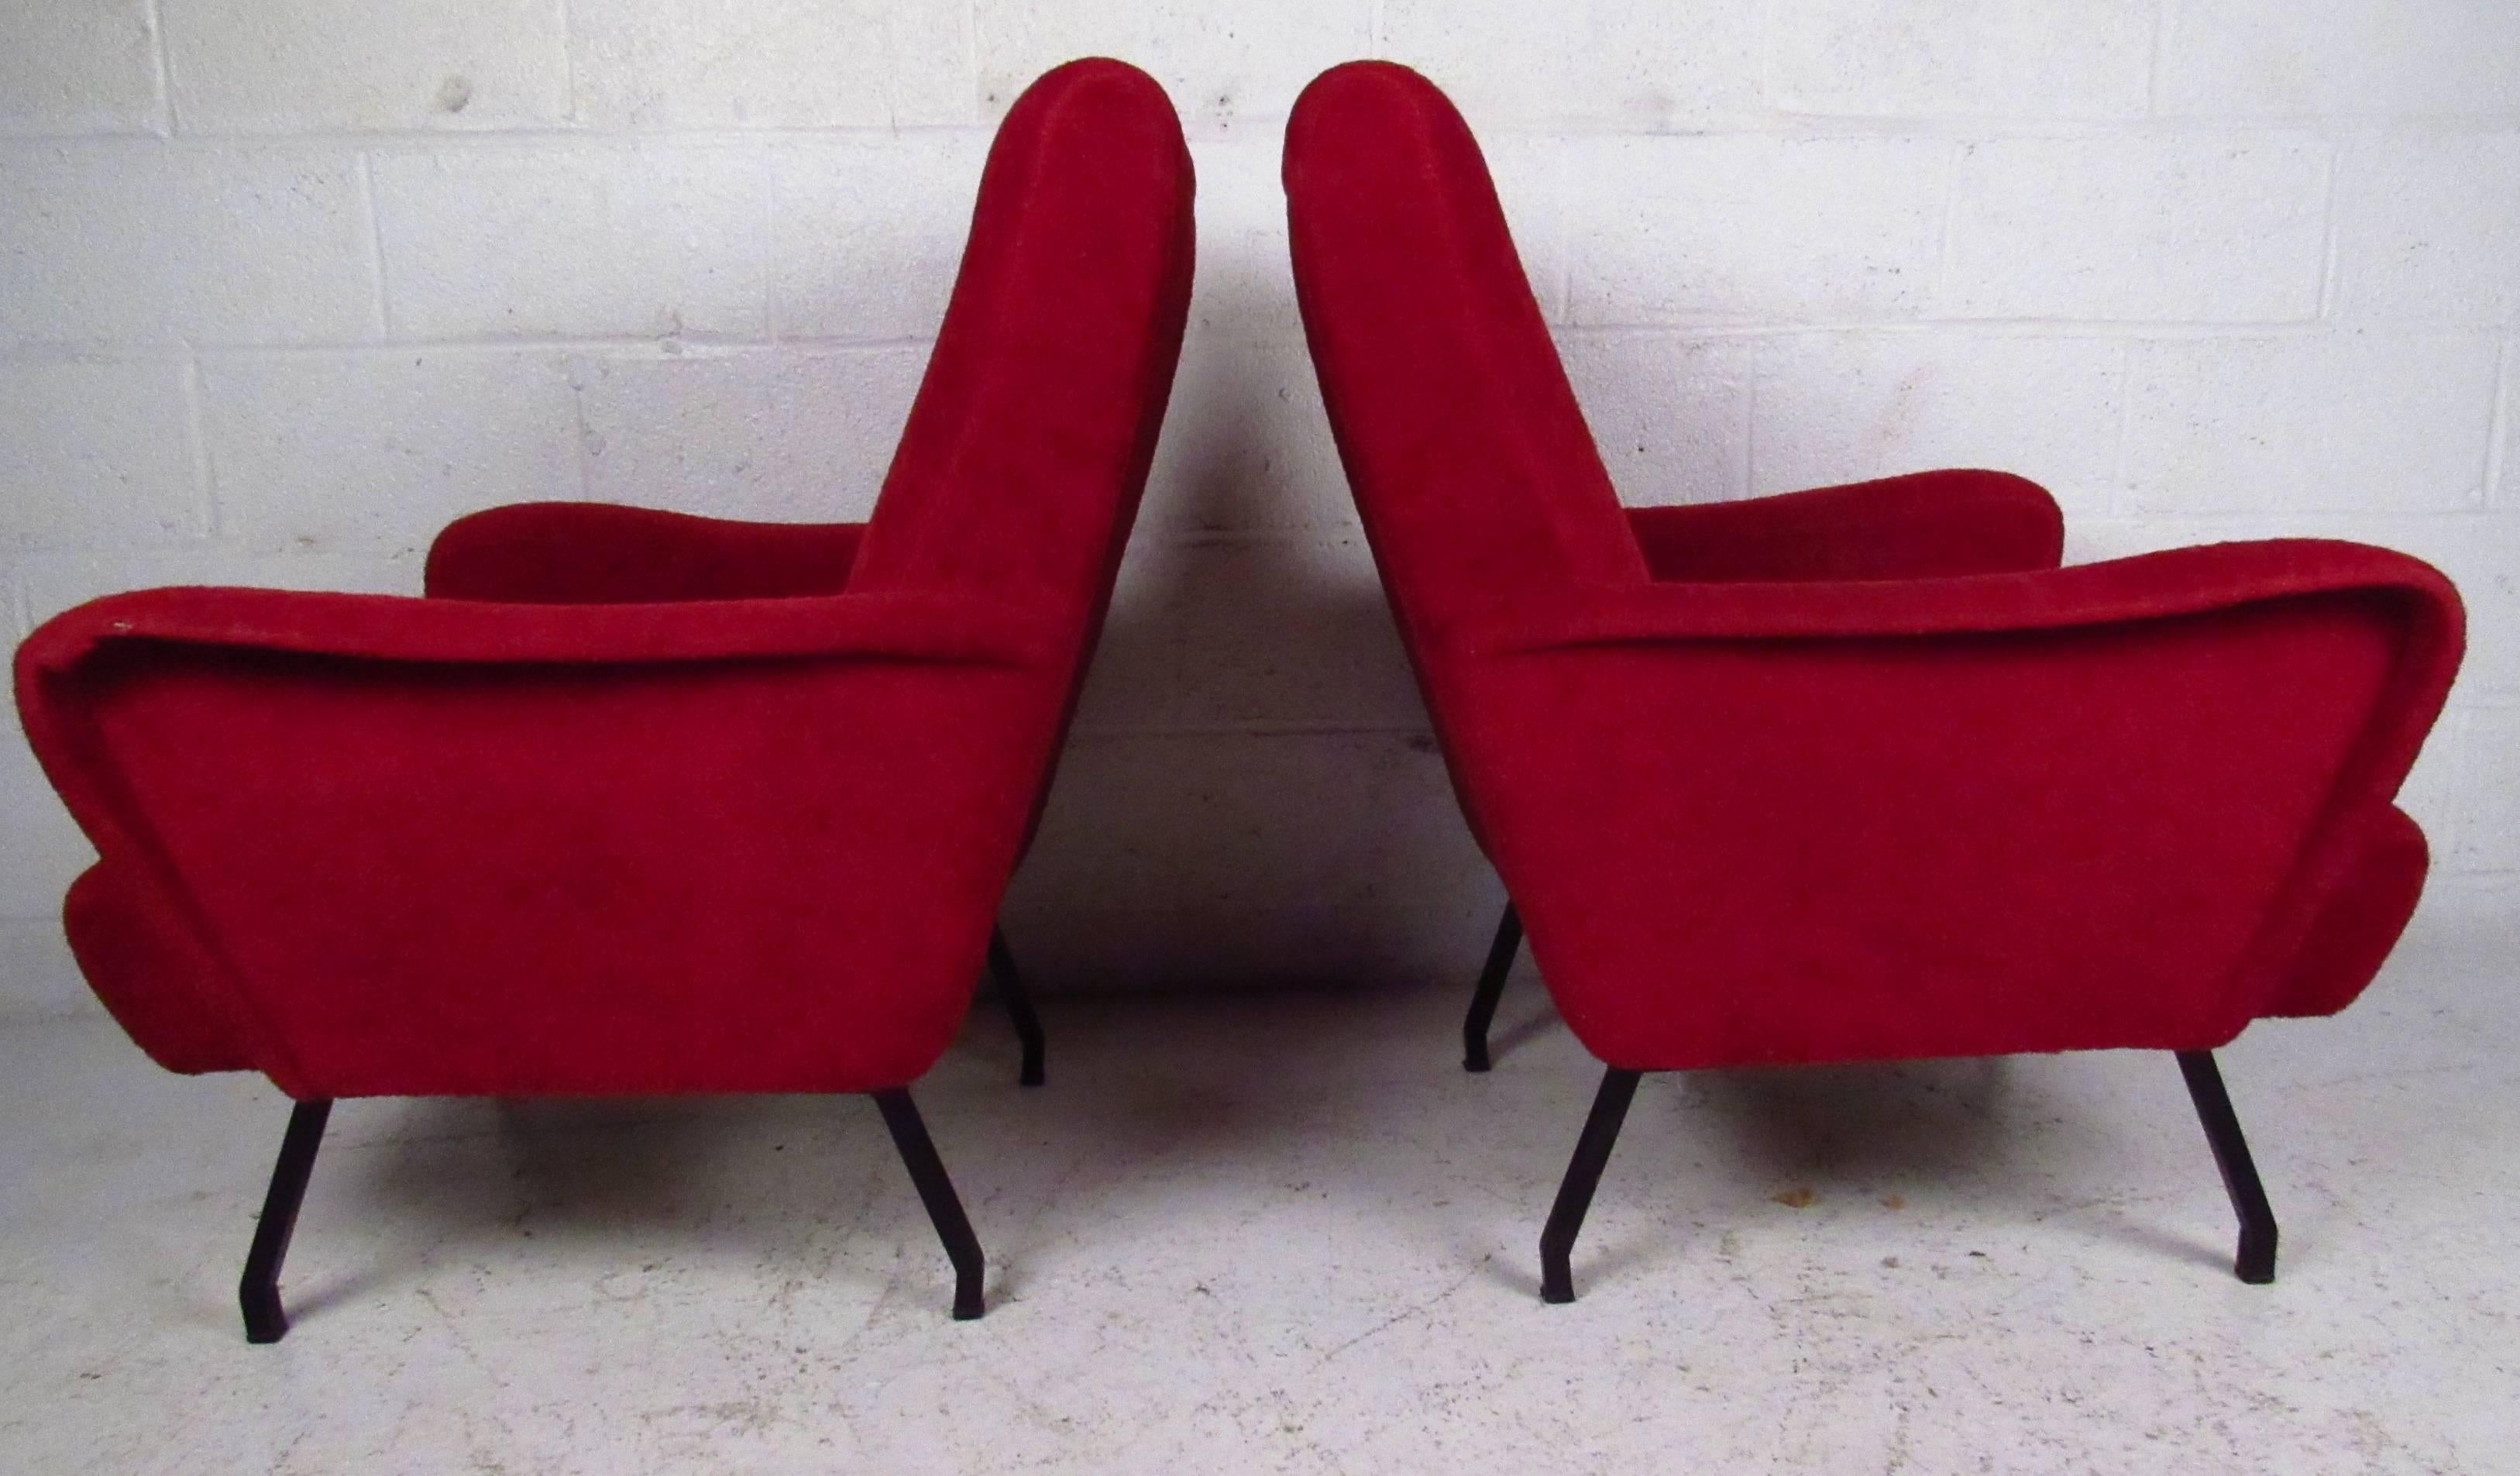 This stylish pair of upholstered lounge chairs with angled metal legs and sculpted arms add to the Italian modern appeal of the set. Perfect pair of vintage high back lounge chairs make a comfortable addition to any interior. Please confirm item